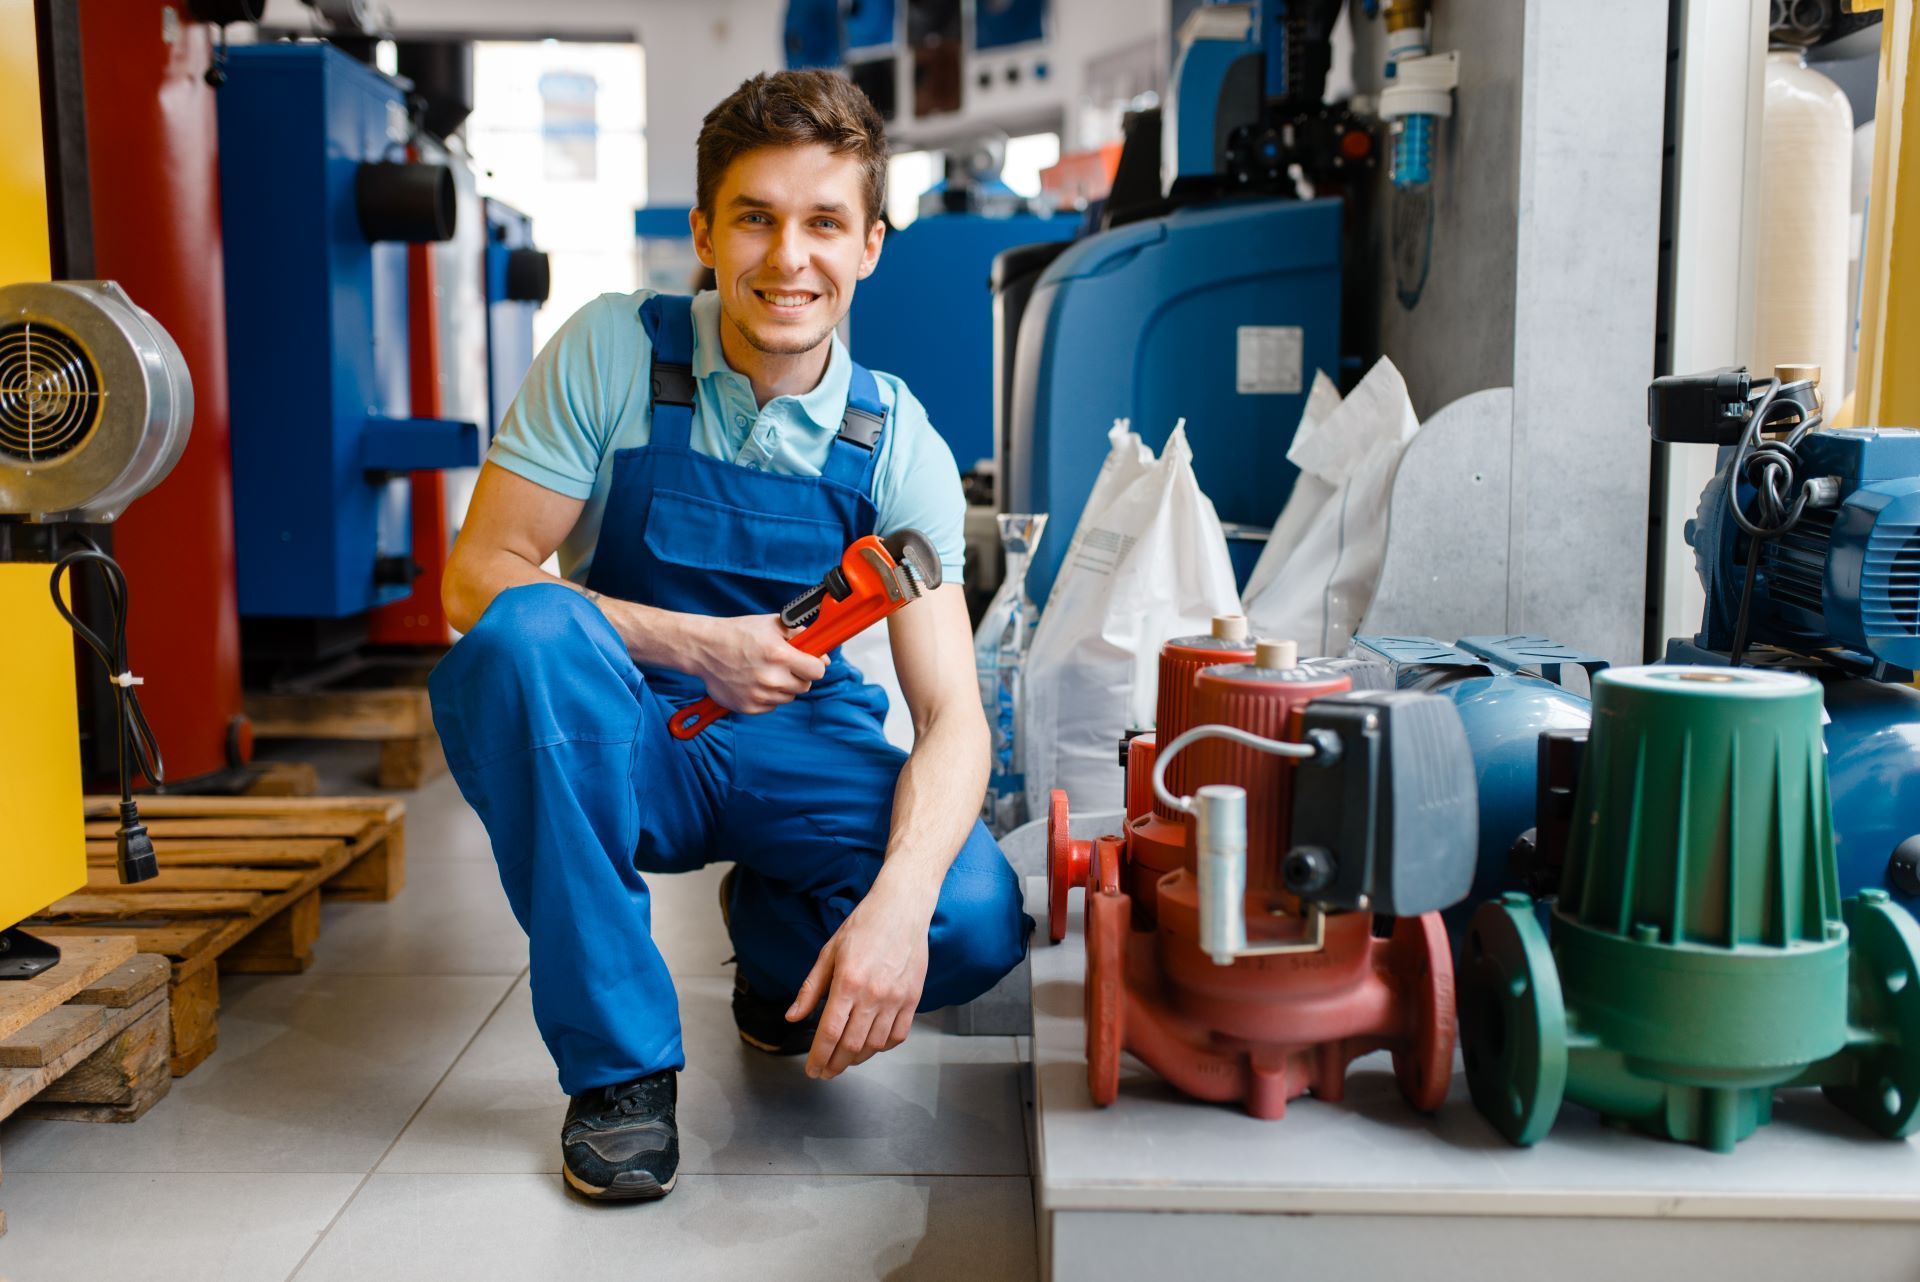 plumber kneeling with wrench in hand next to a collection of sump pumps